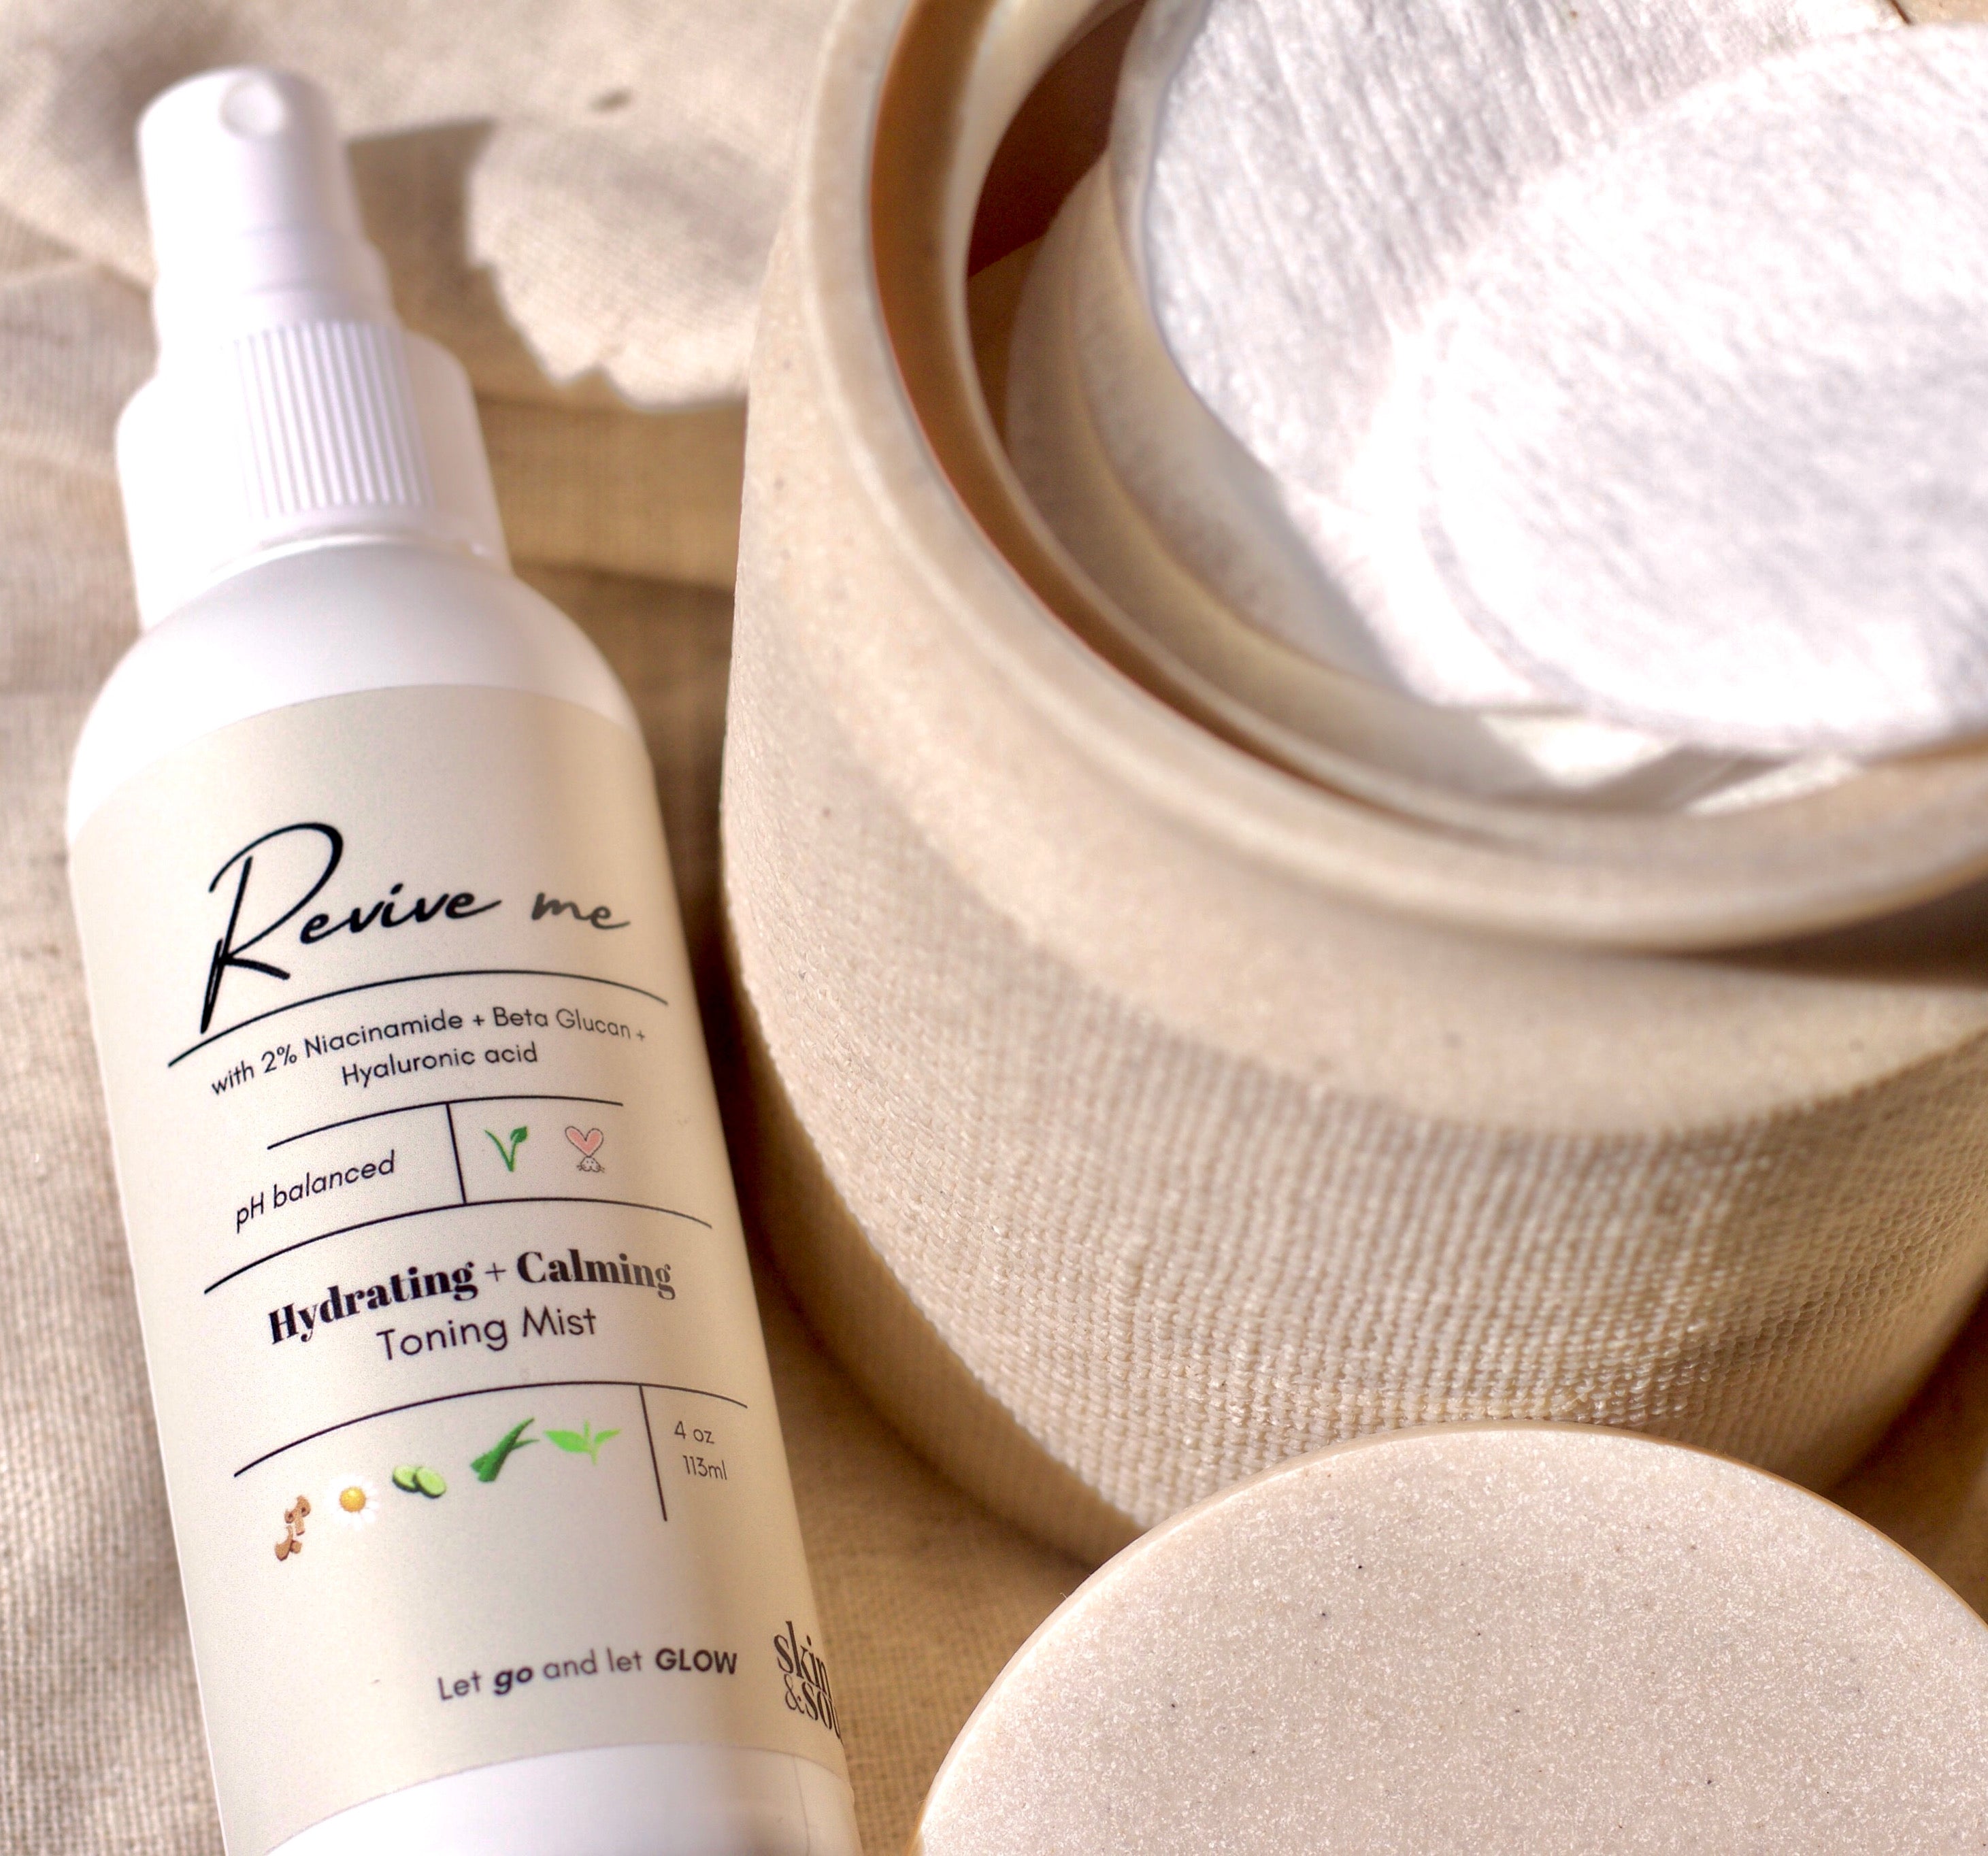 Revive Me Hydrating + Calming Toning Mist